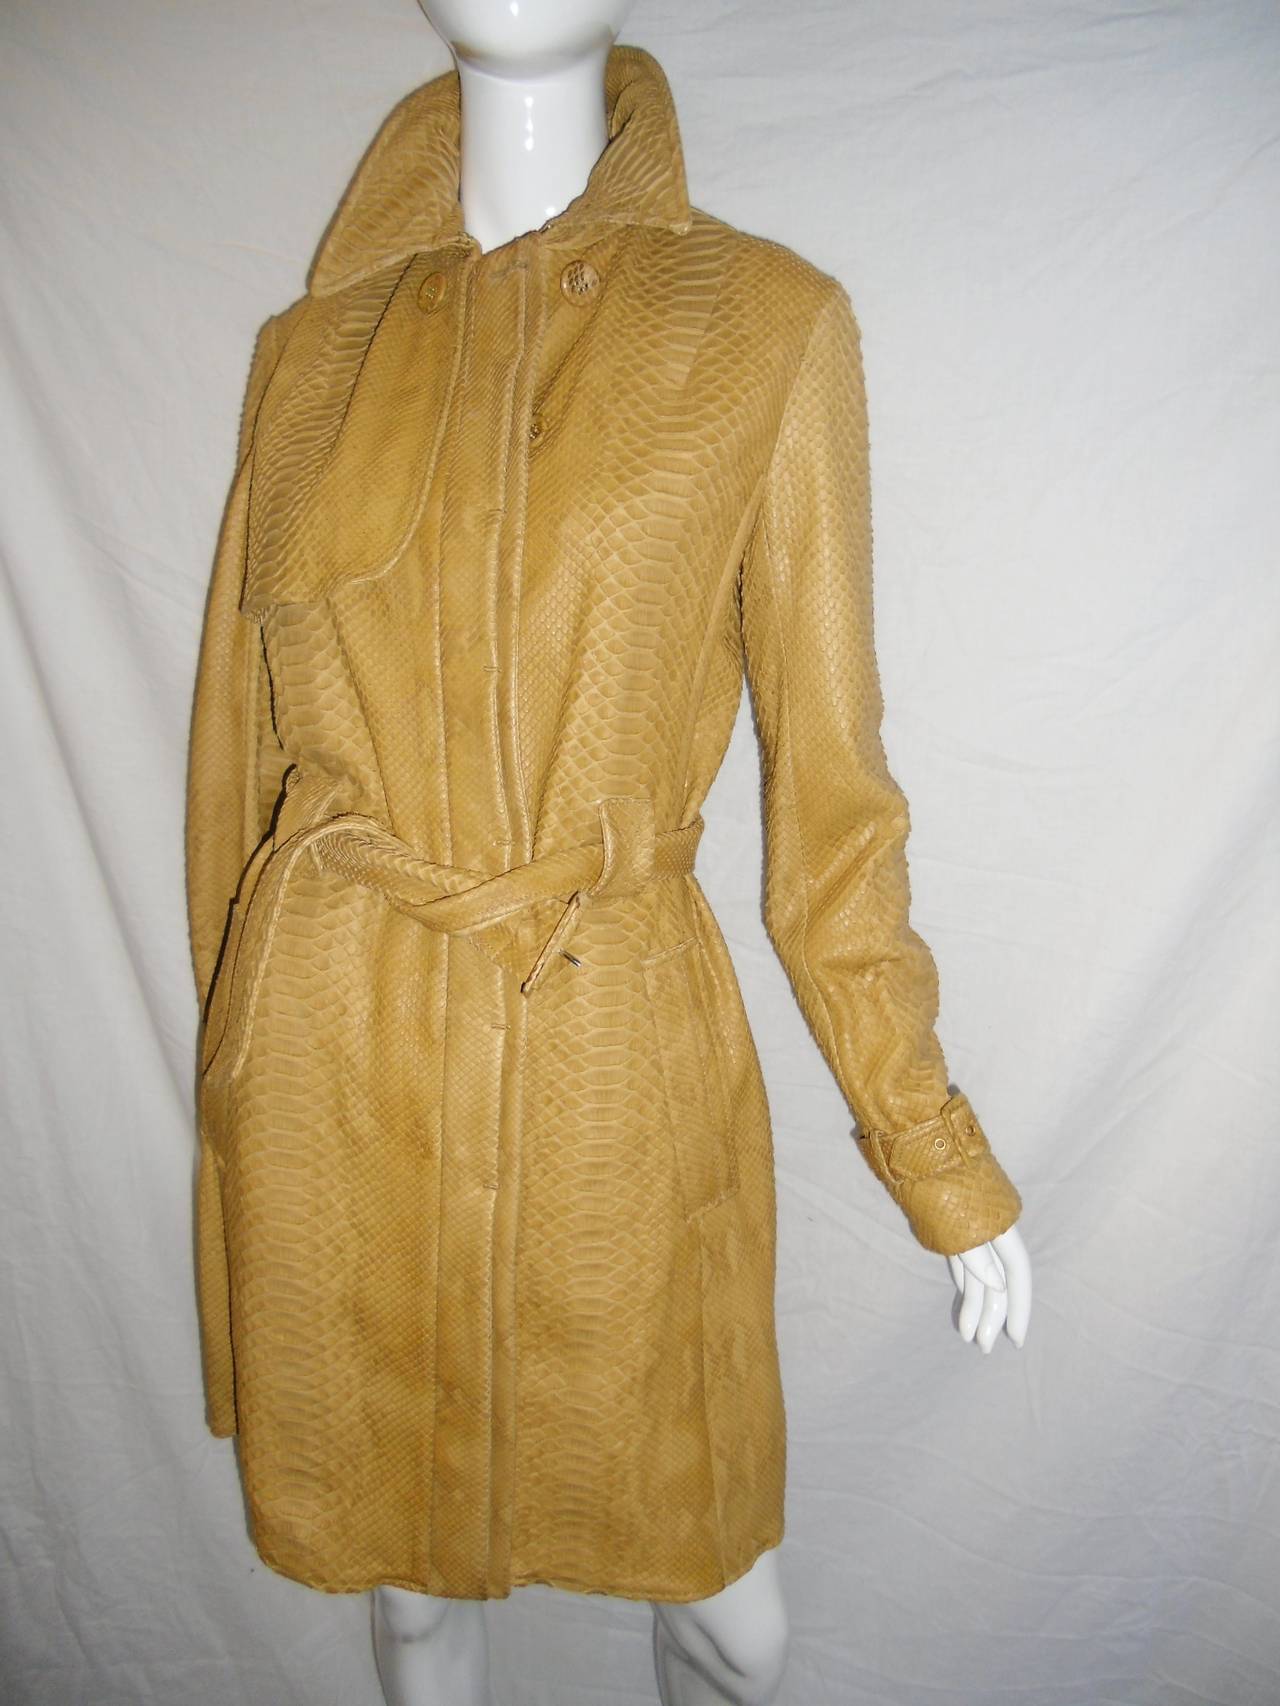 Famous Italian  house for exotic skin Borbonese Python Trench Coat Jacket and skirt ensemble . Breathtaking ! Superb craftsmanship. Every detail is perfect!! Full skins. Set is new never worn. Size 4o us 4. Retail price was in tens of thousends
Made